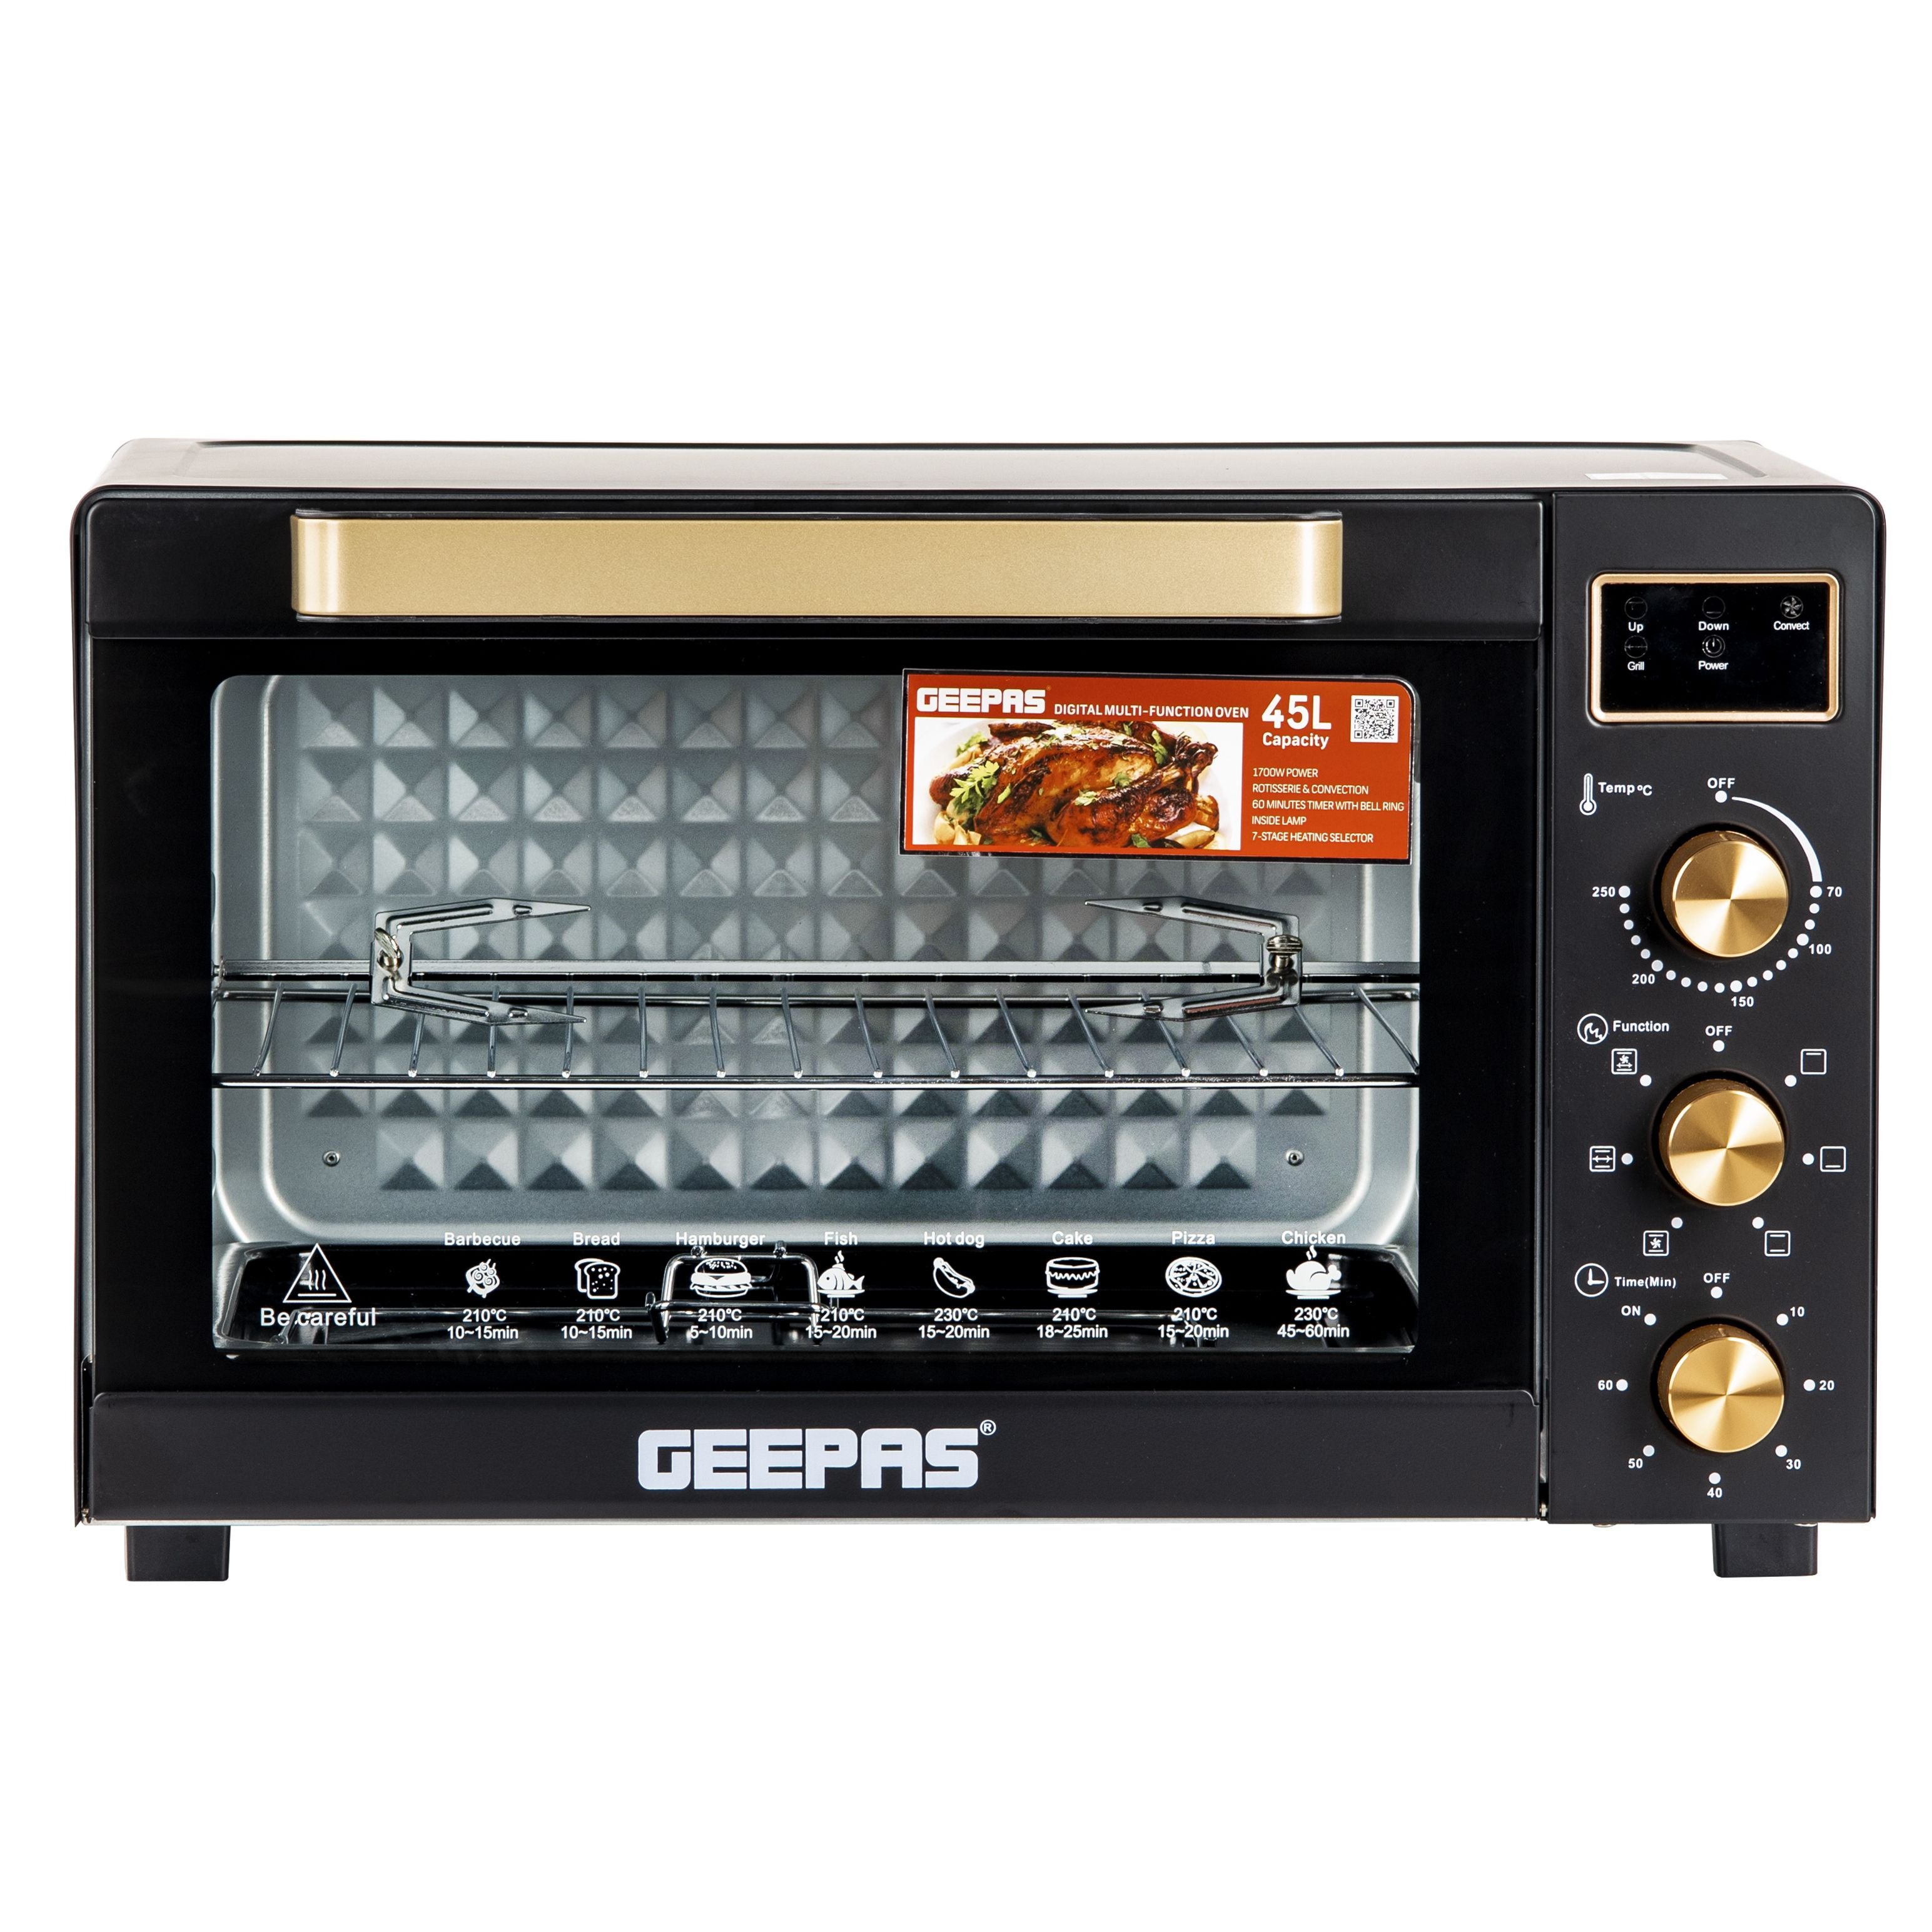 Digital Multifunction Oven, Rotisserie & Convection, GO34056 | 60min Timer With Bell Ring | Inside Lamp | Temperature Control | 45L Oven With 7 Stages Of Function Switch Selector